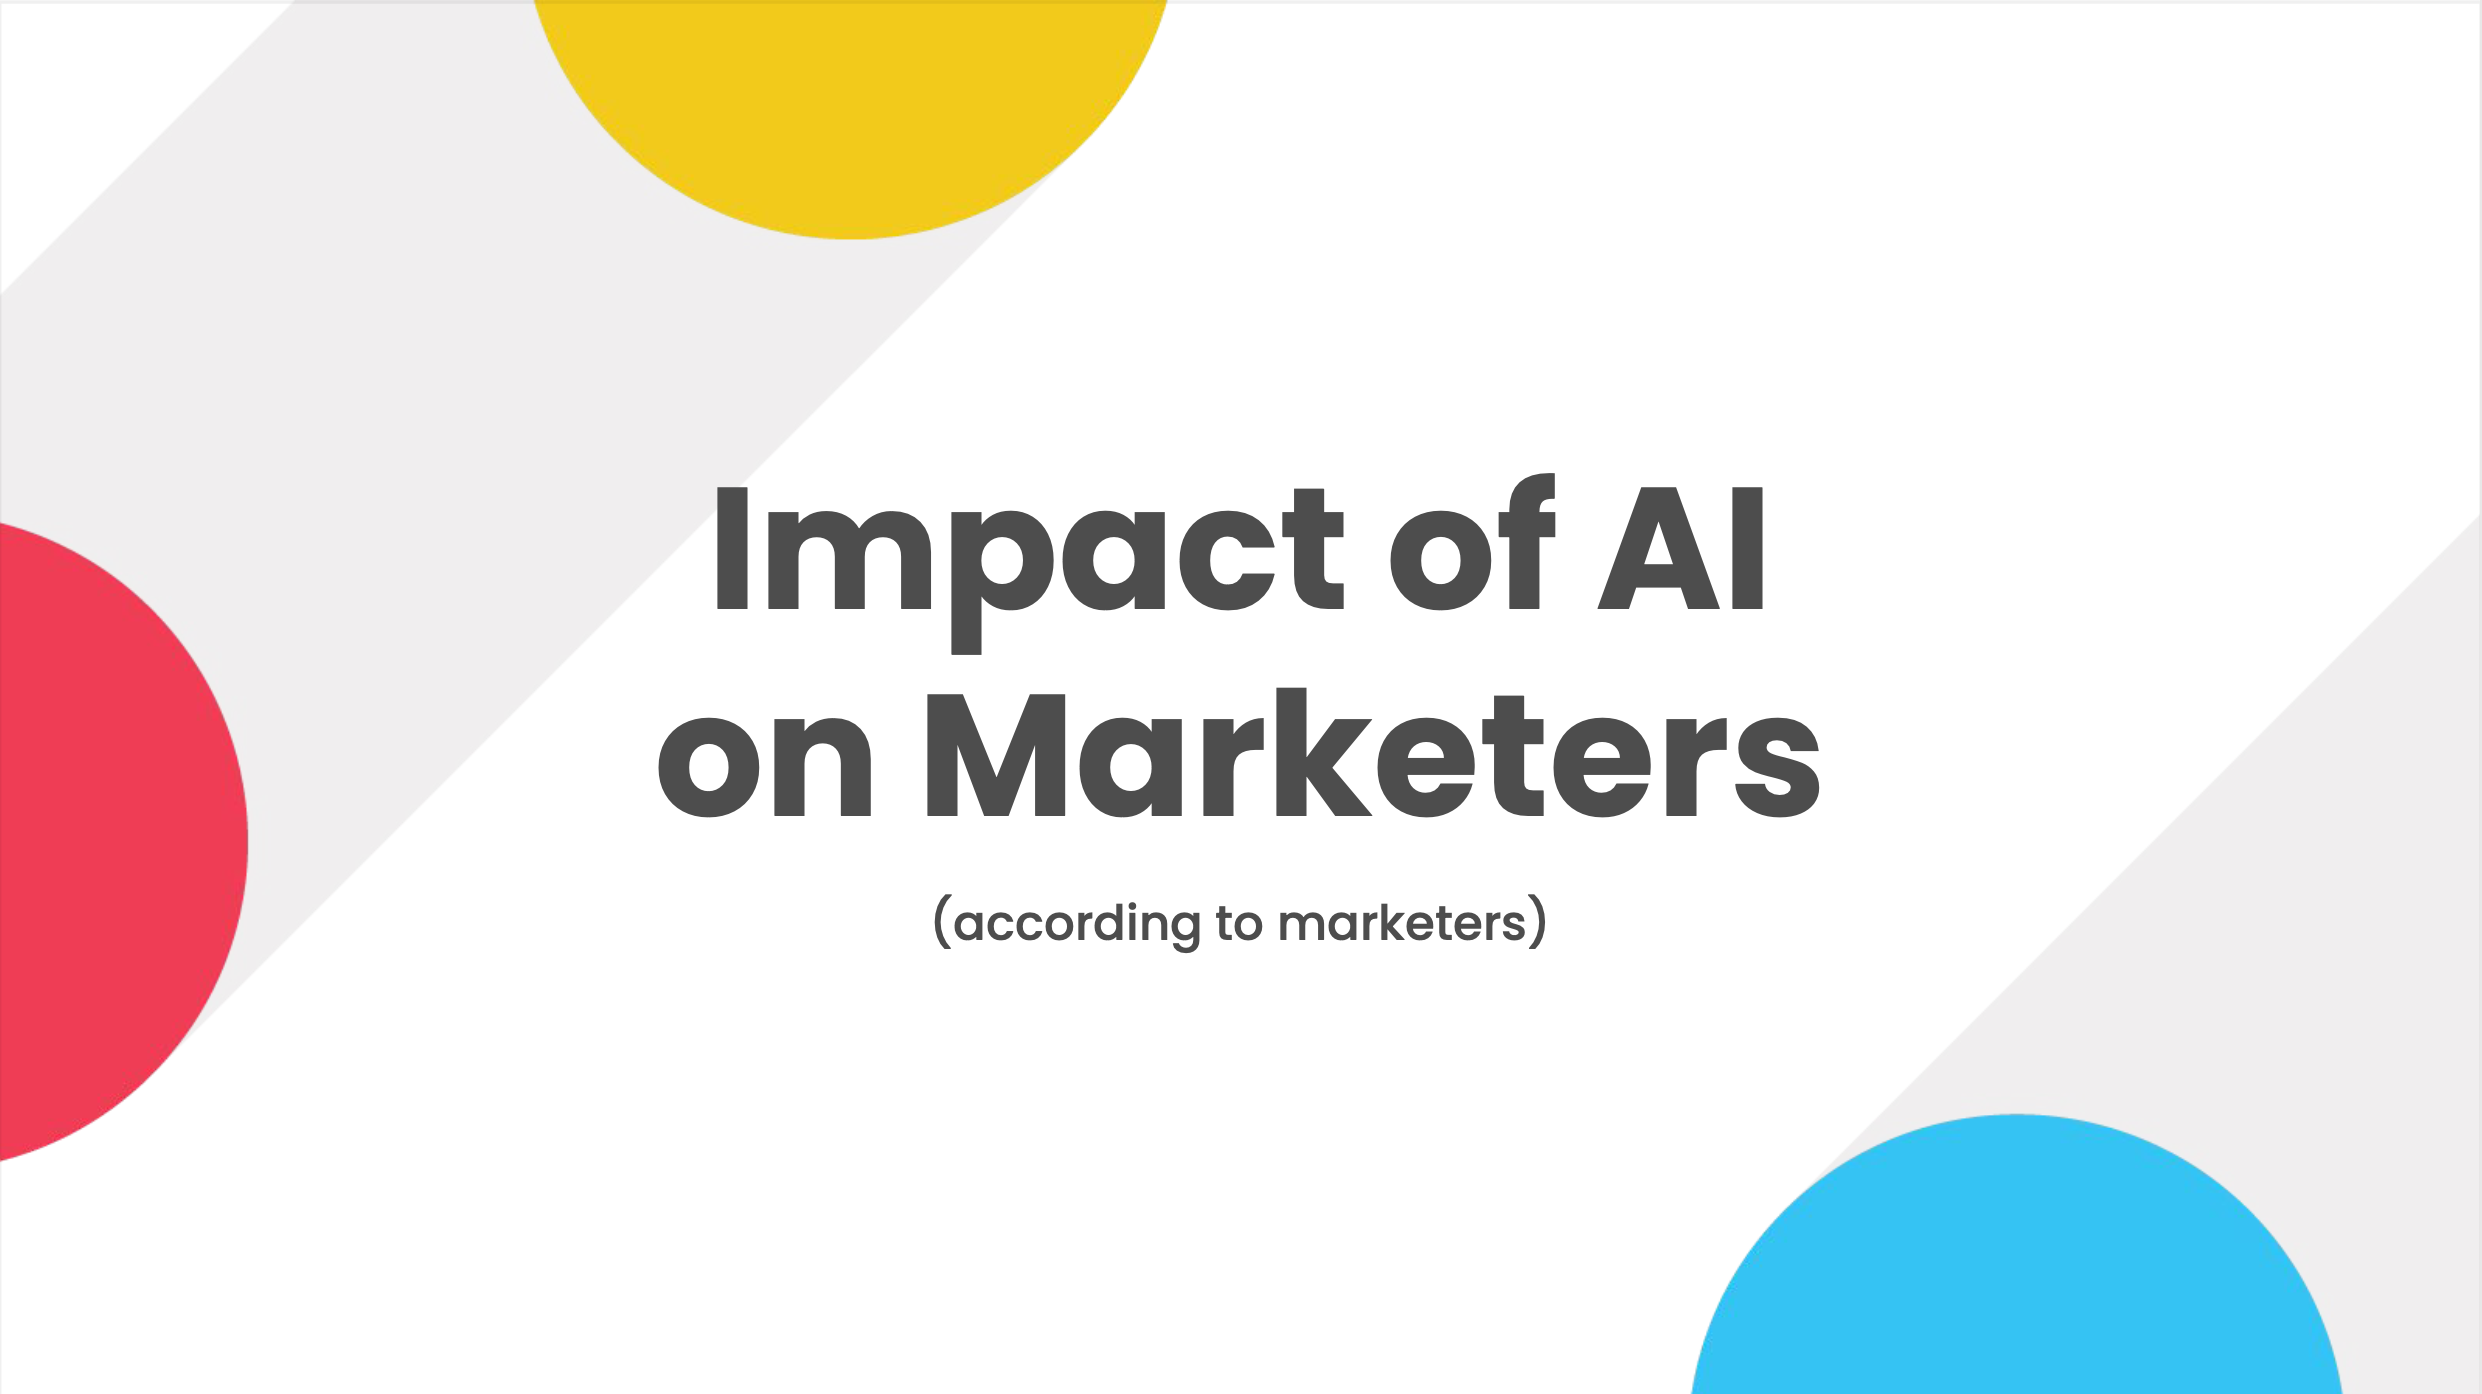 The Reality of AI: How Marketers Really Feel About AI